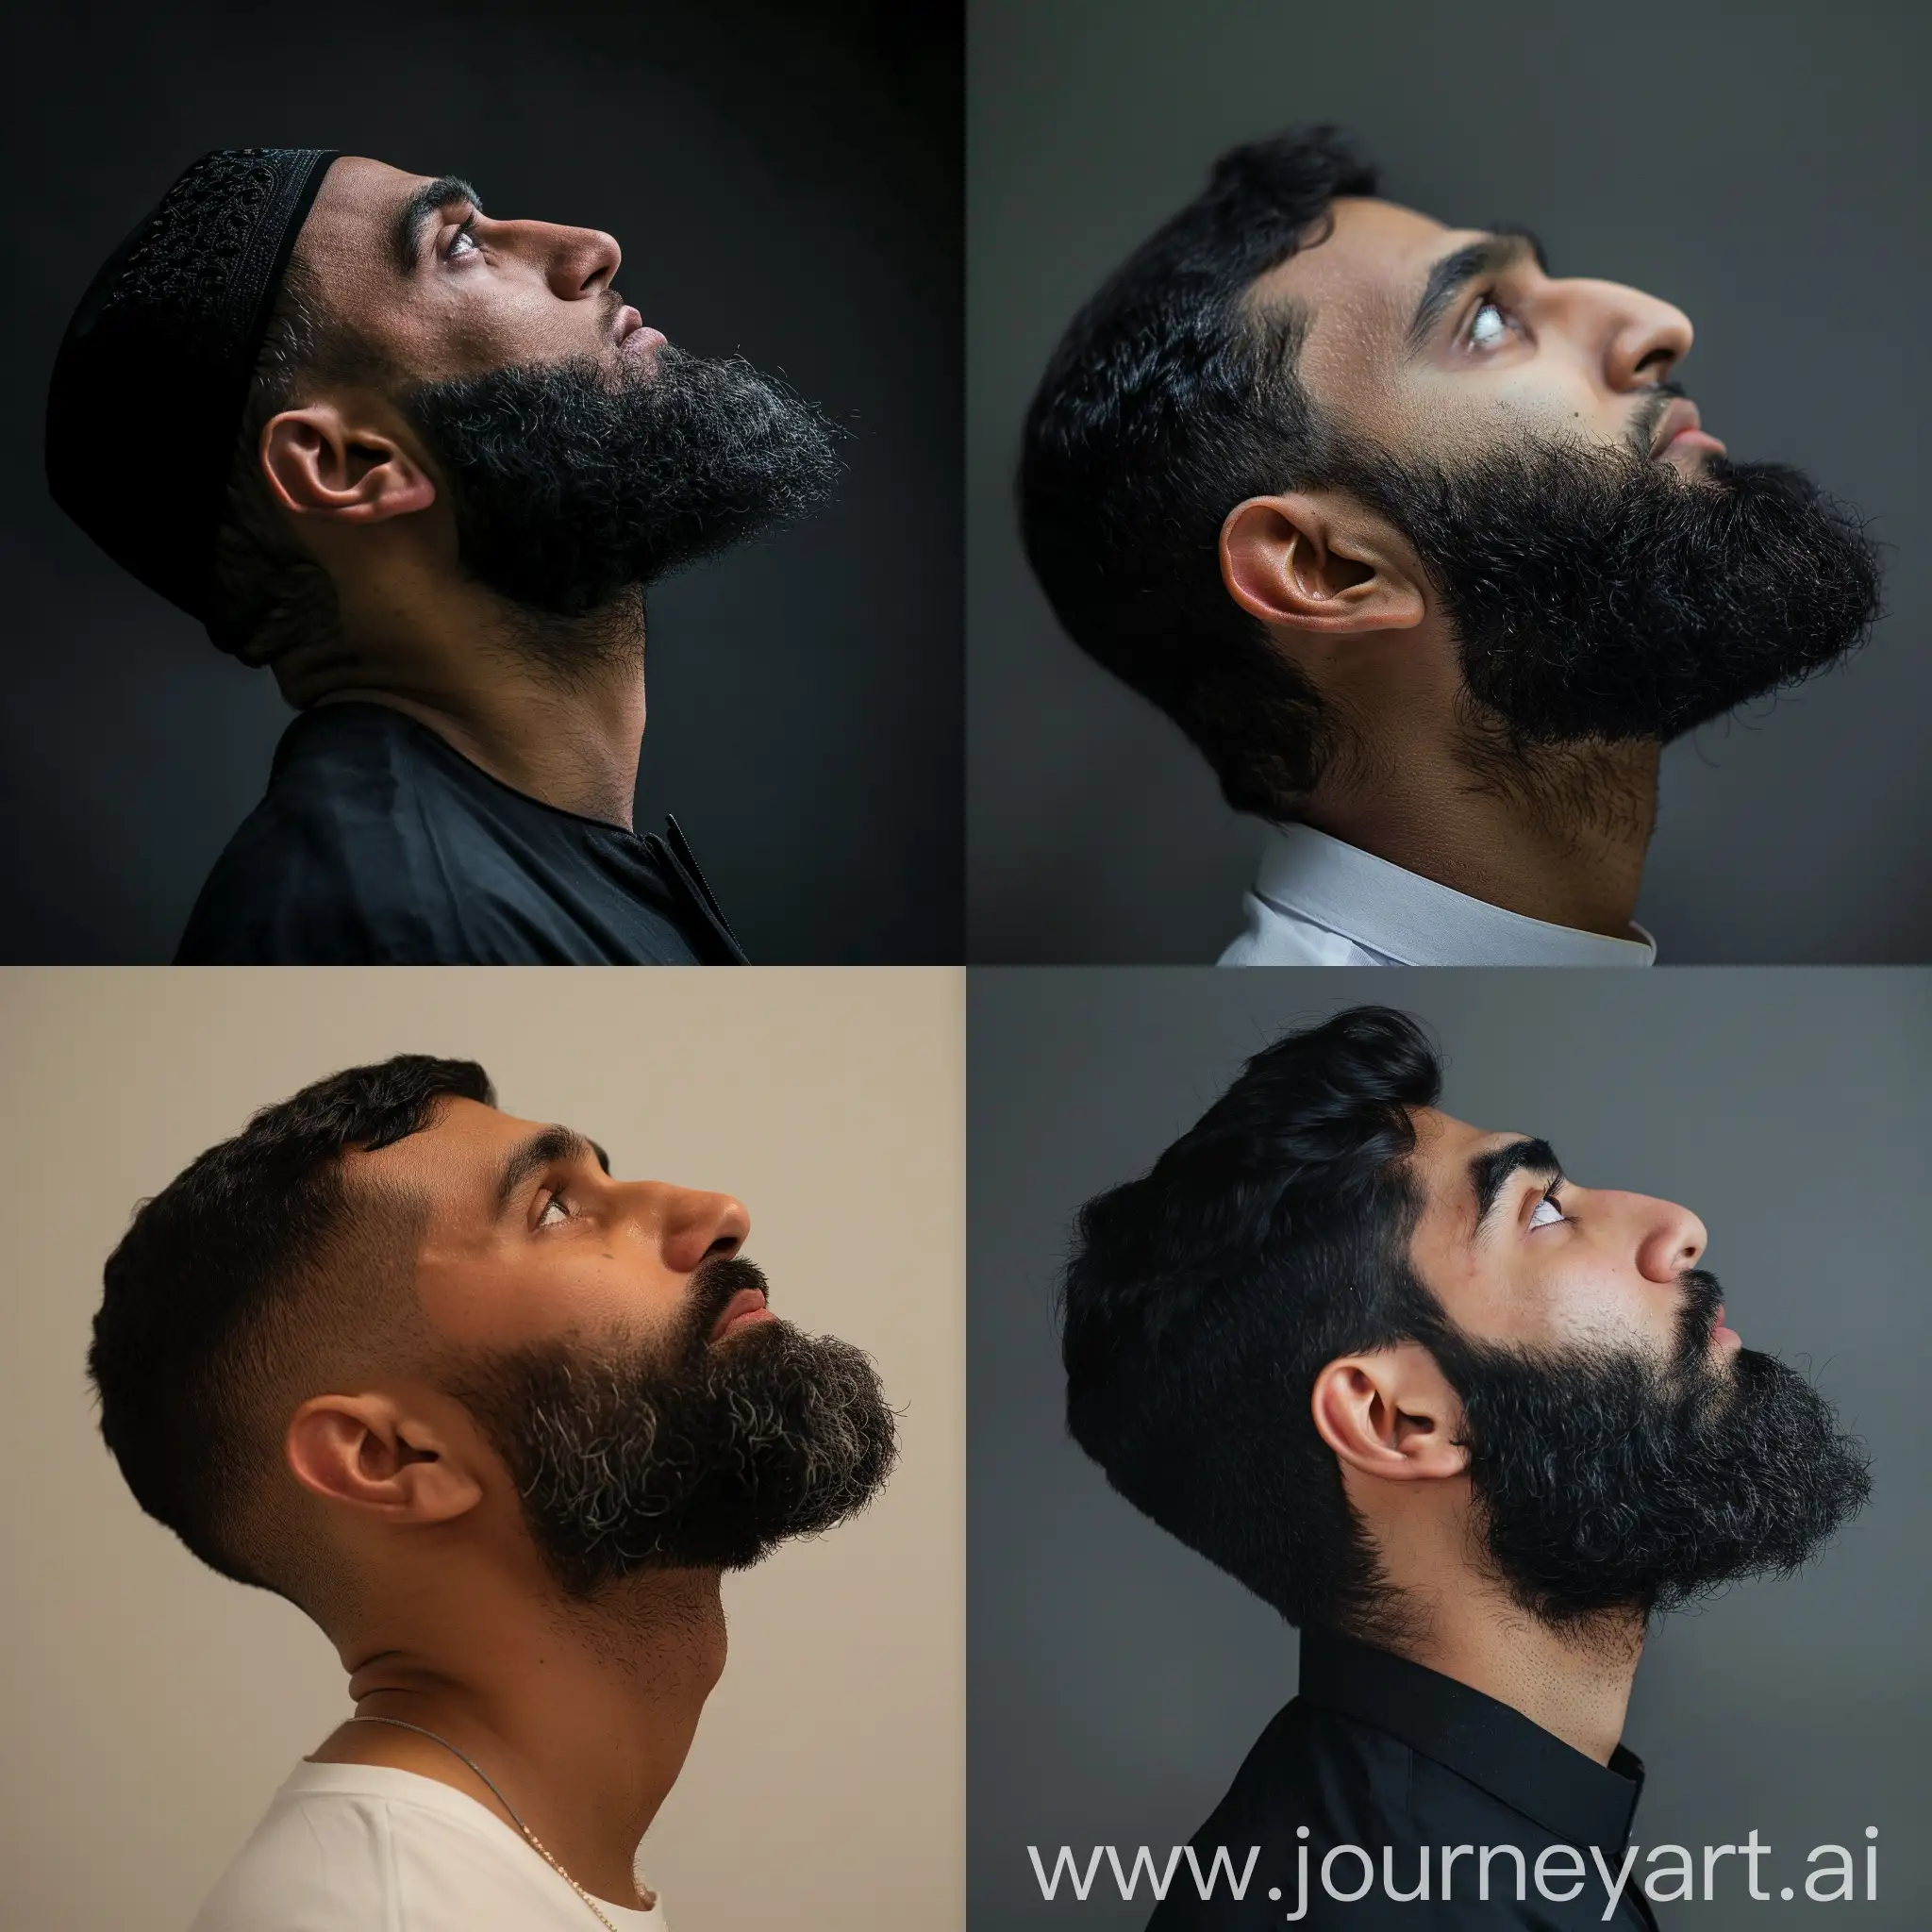 Devout-Muslim-Man-Contemplating-with-Reverence-in-Profile-View